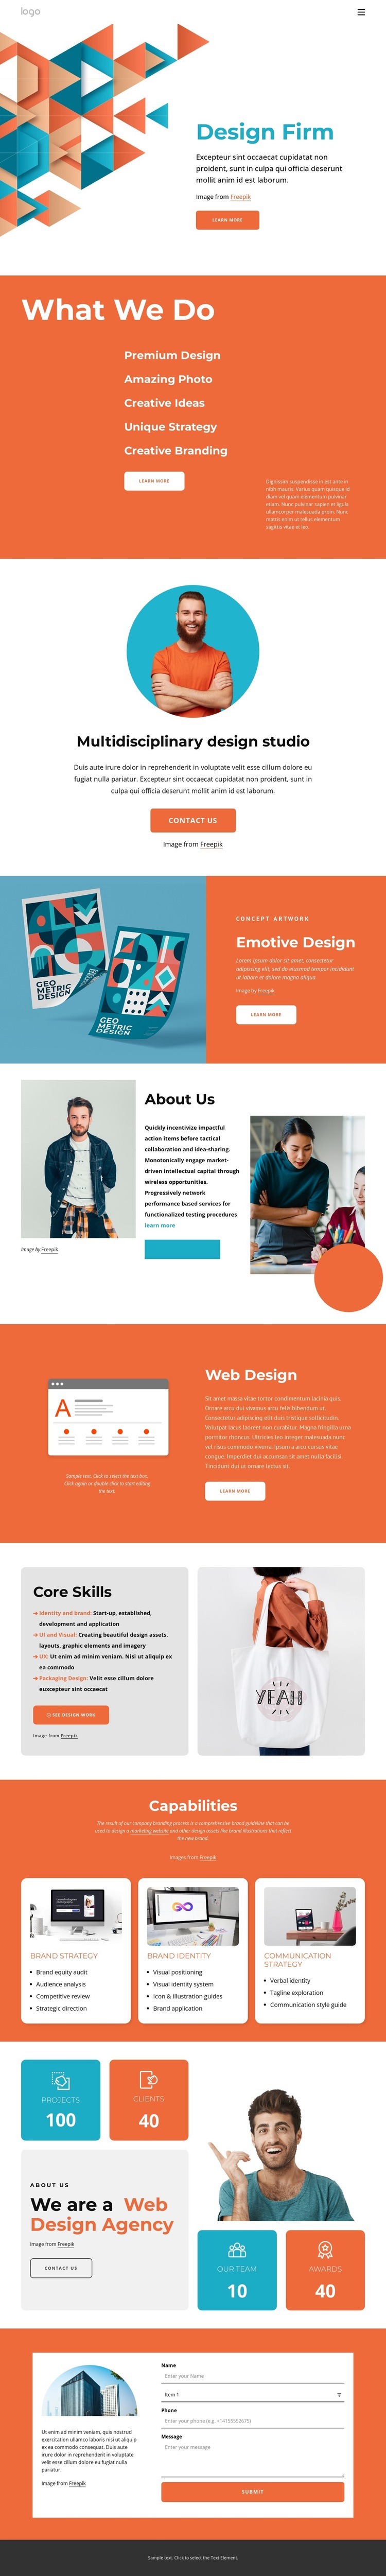 Creative ideas and great design Homepage Design